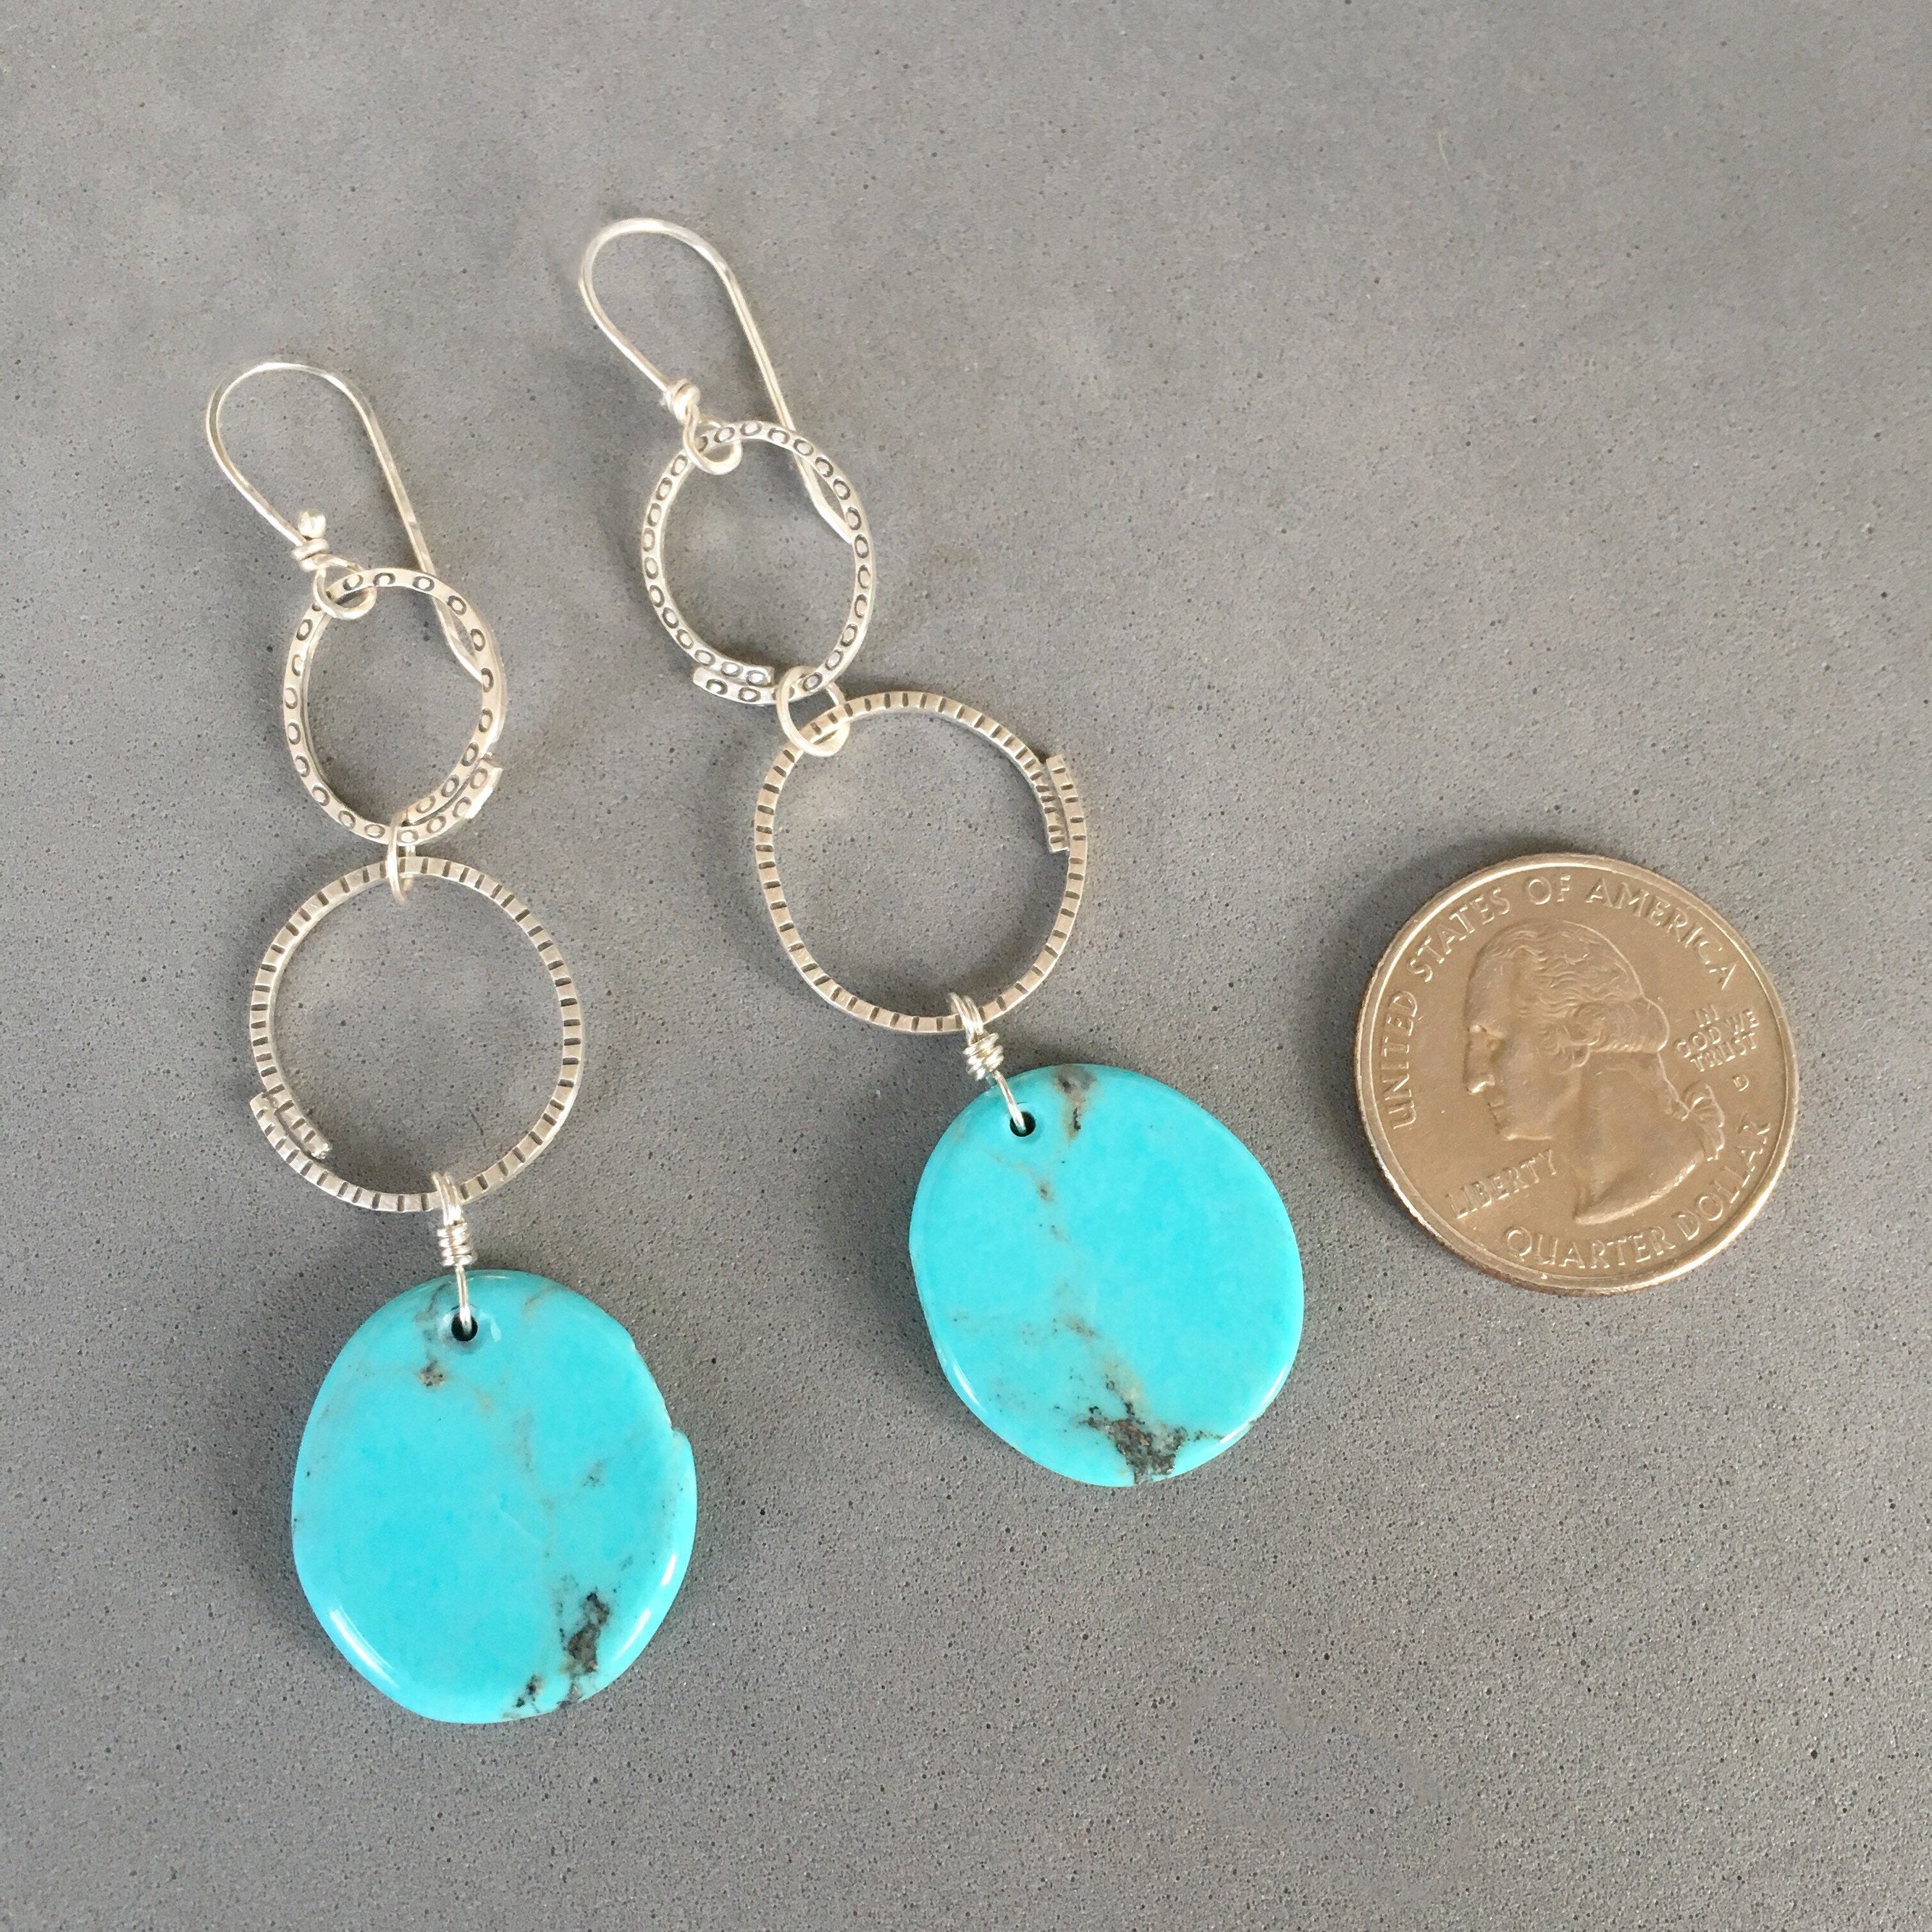 Turquoise Stamped Earrings